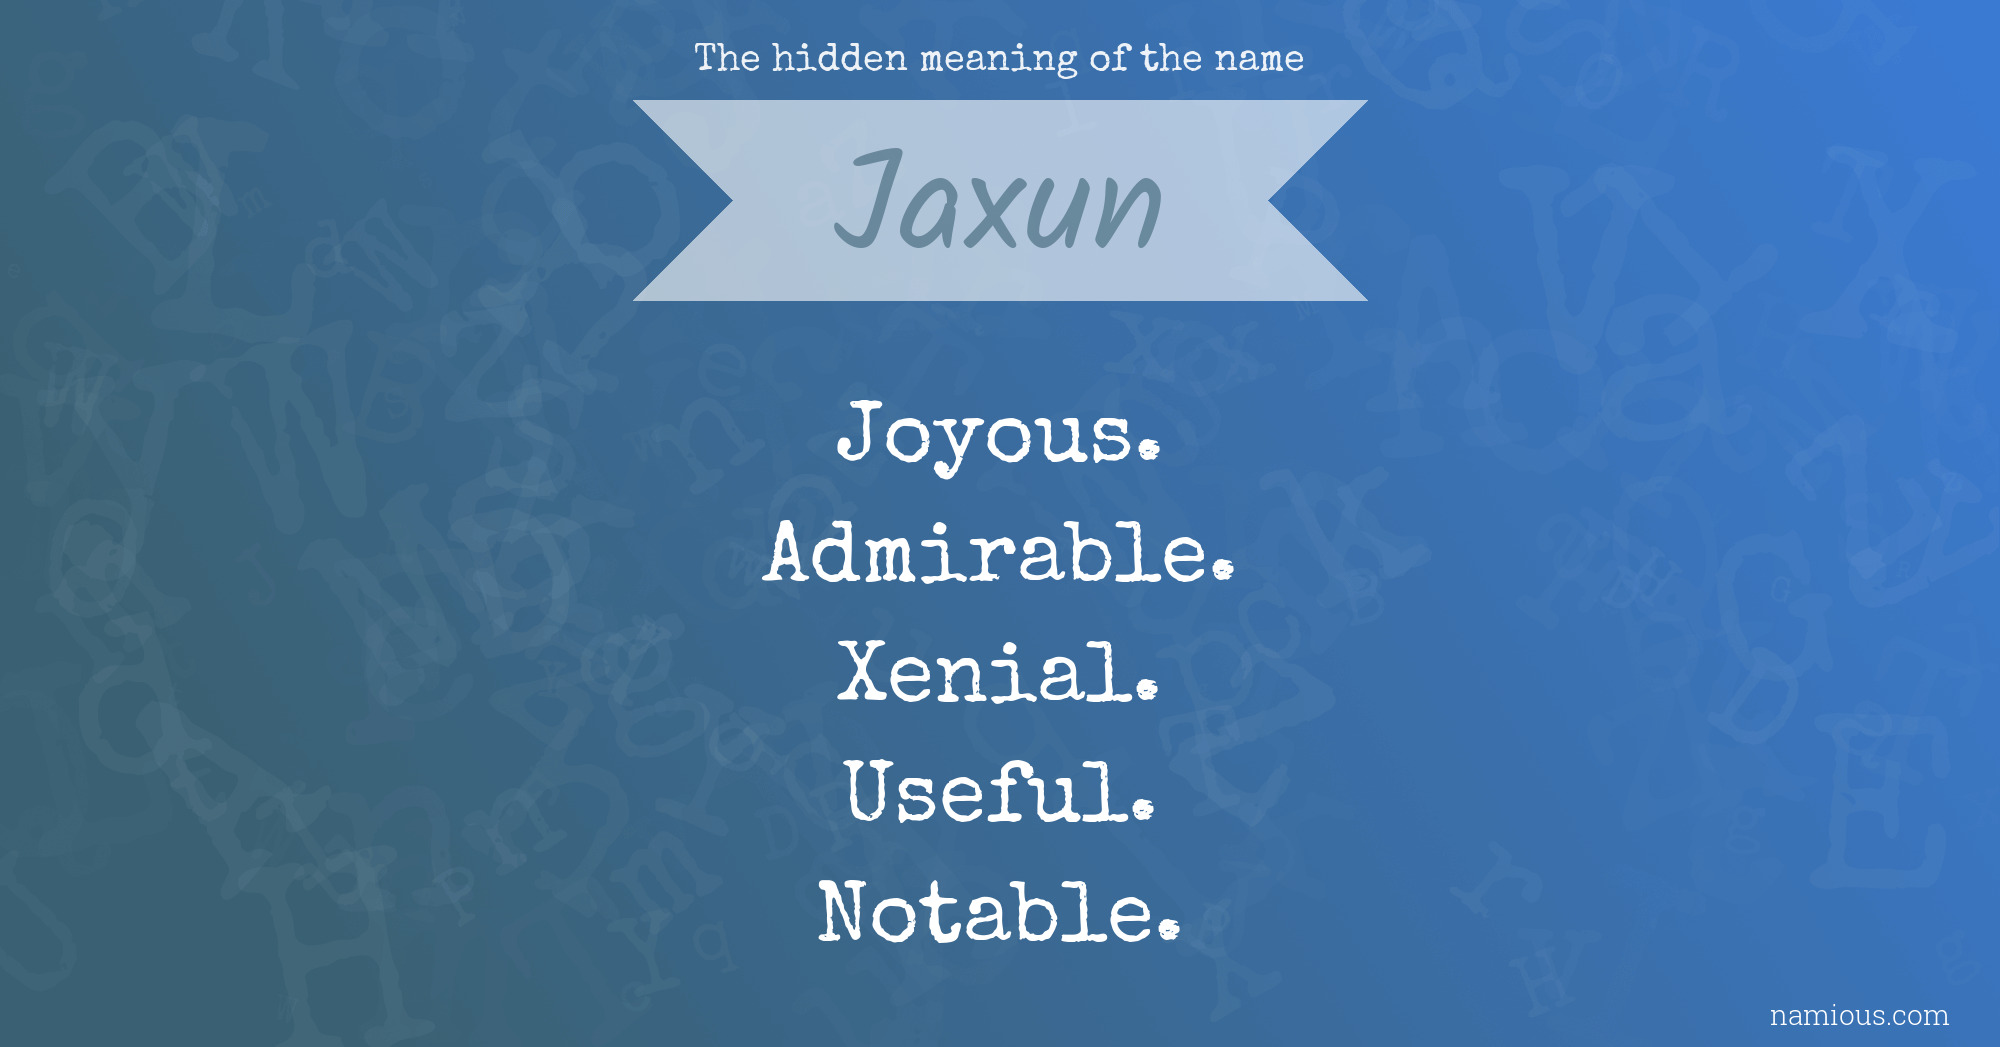 The hidden meaning of the name Jaxun